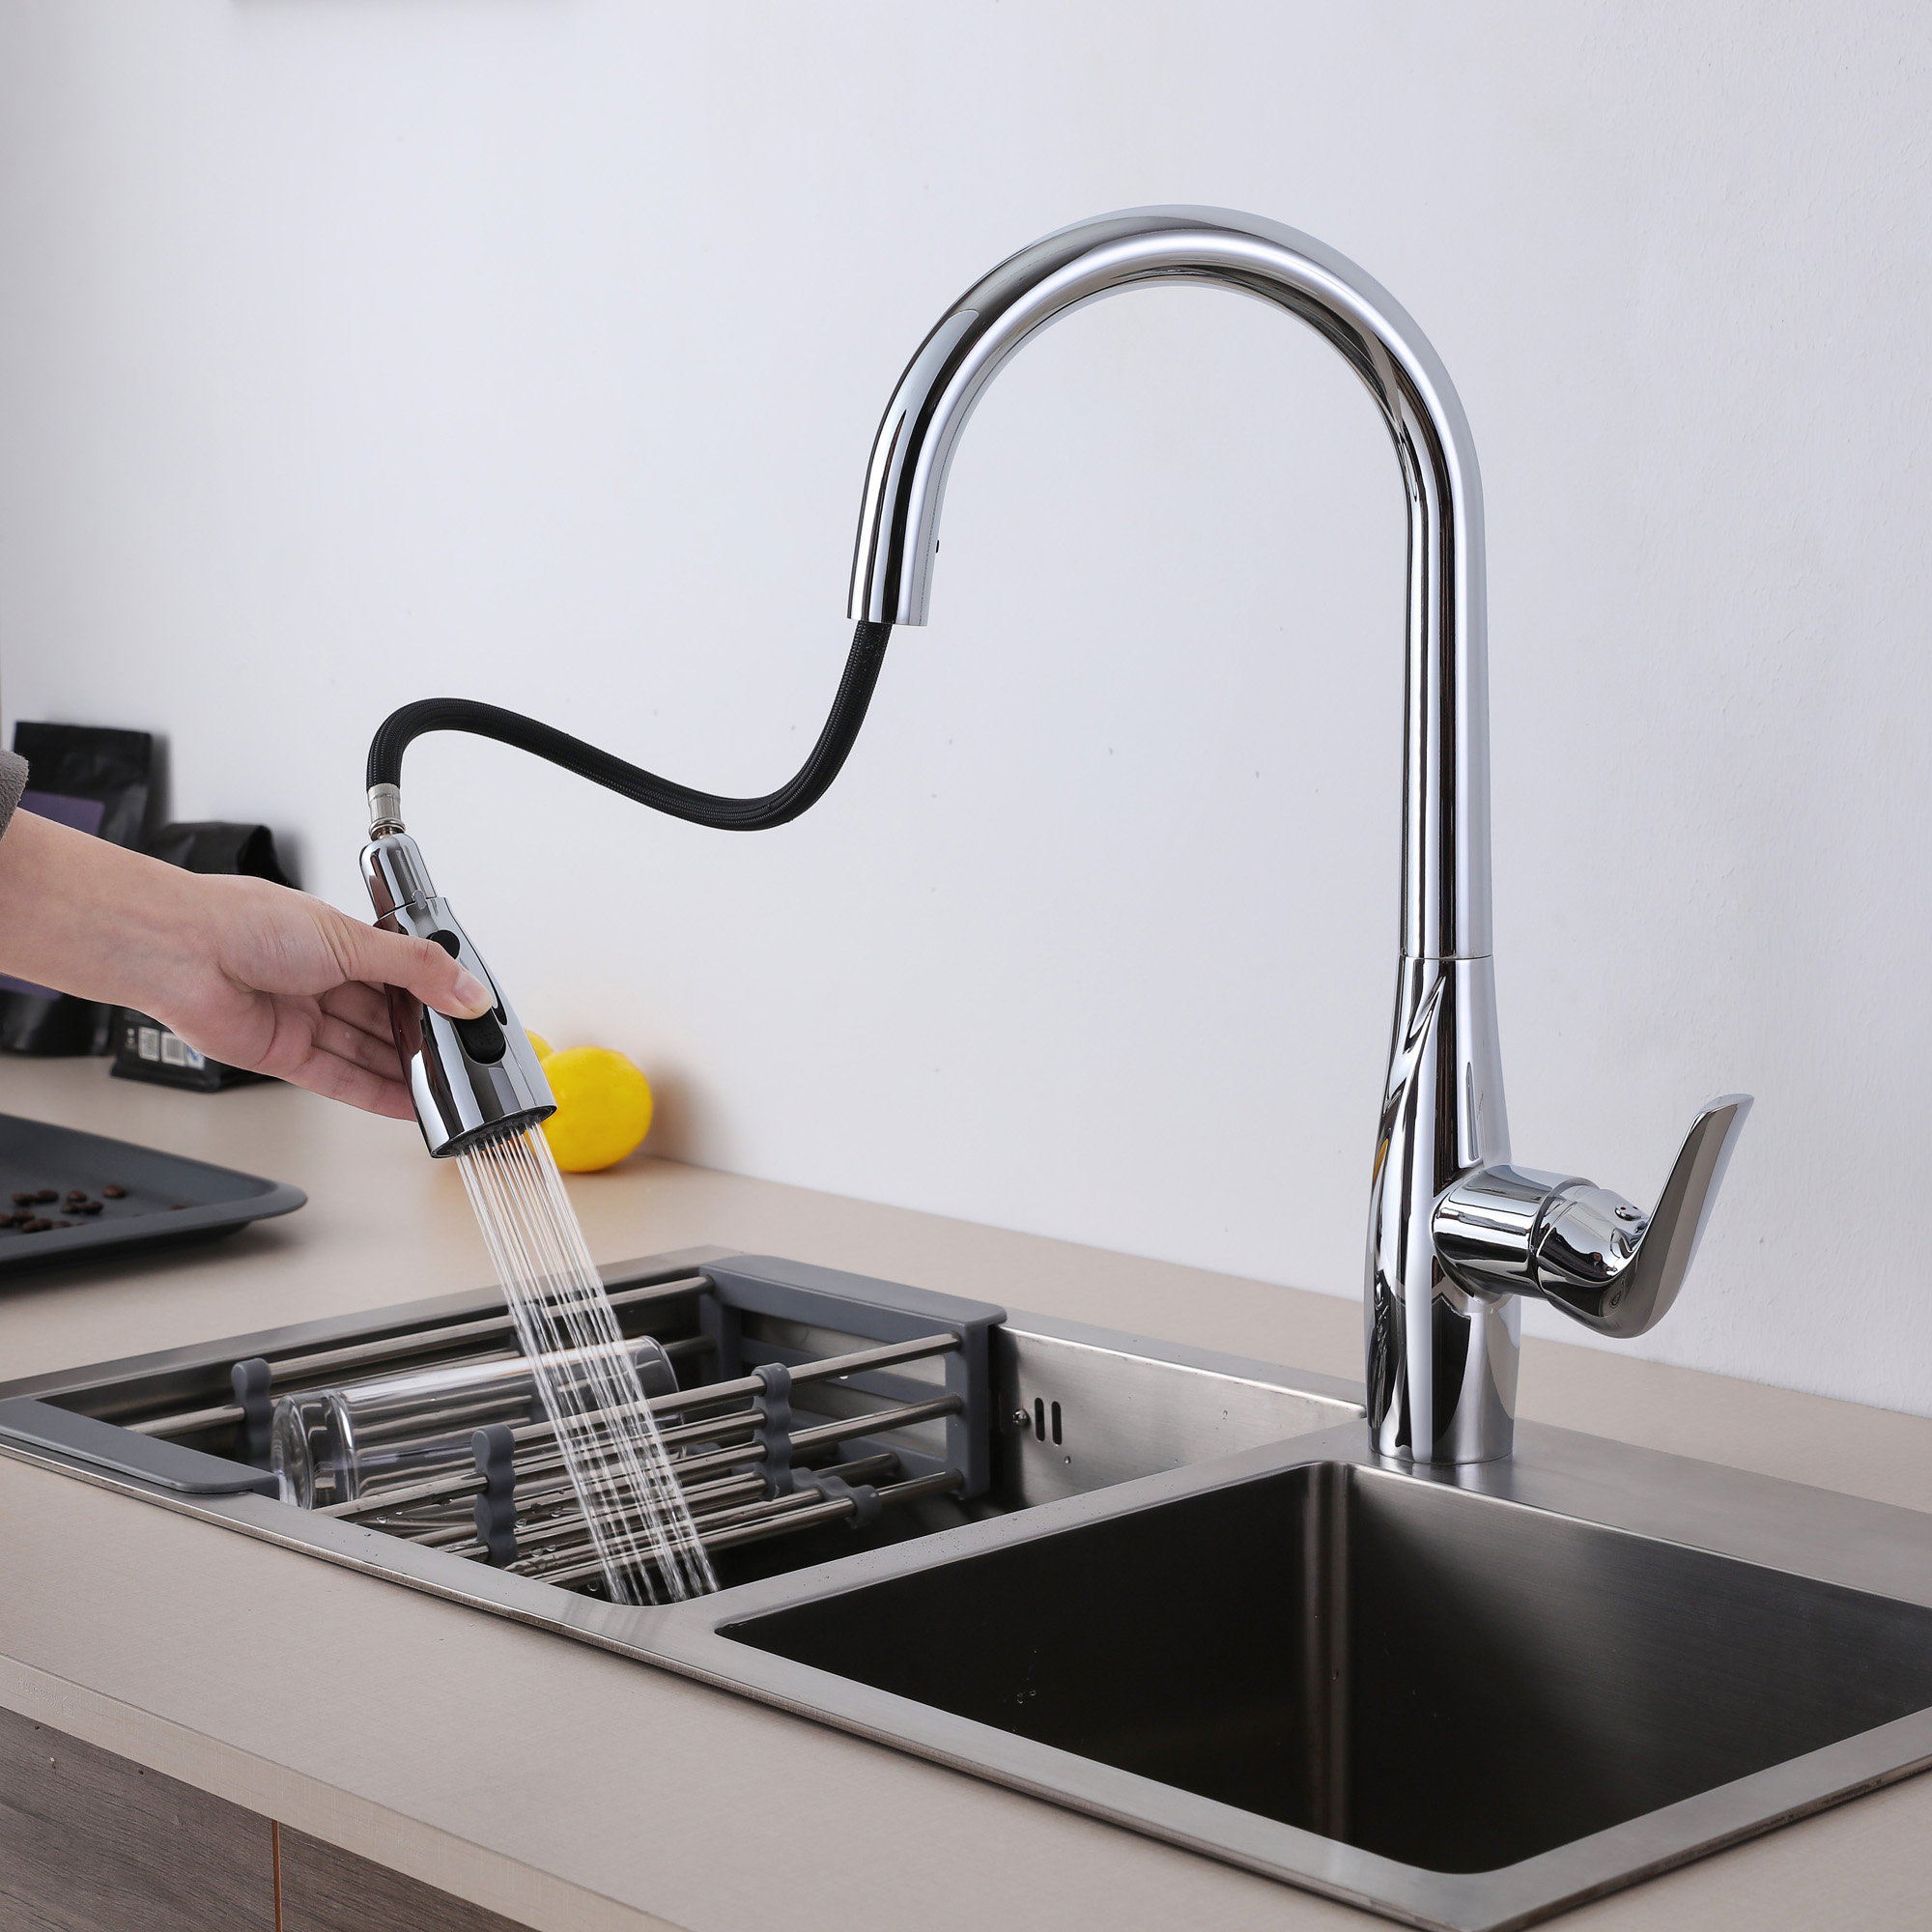 New Design Zinc Alloy Body Stainless Steel Spout Long Neck Pull Out Kitchen Faucet